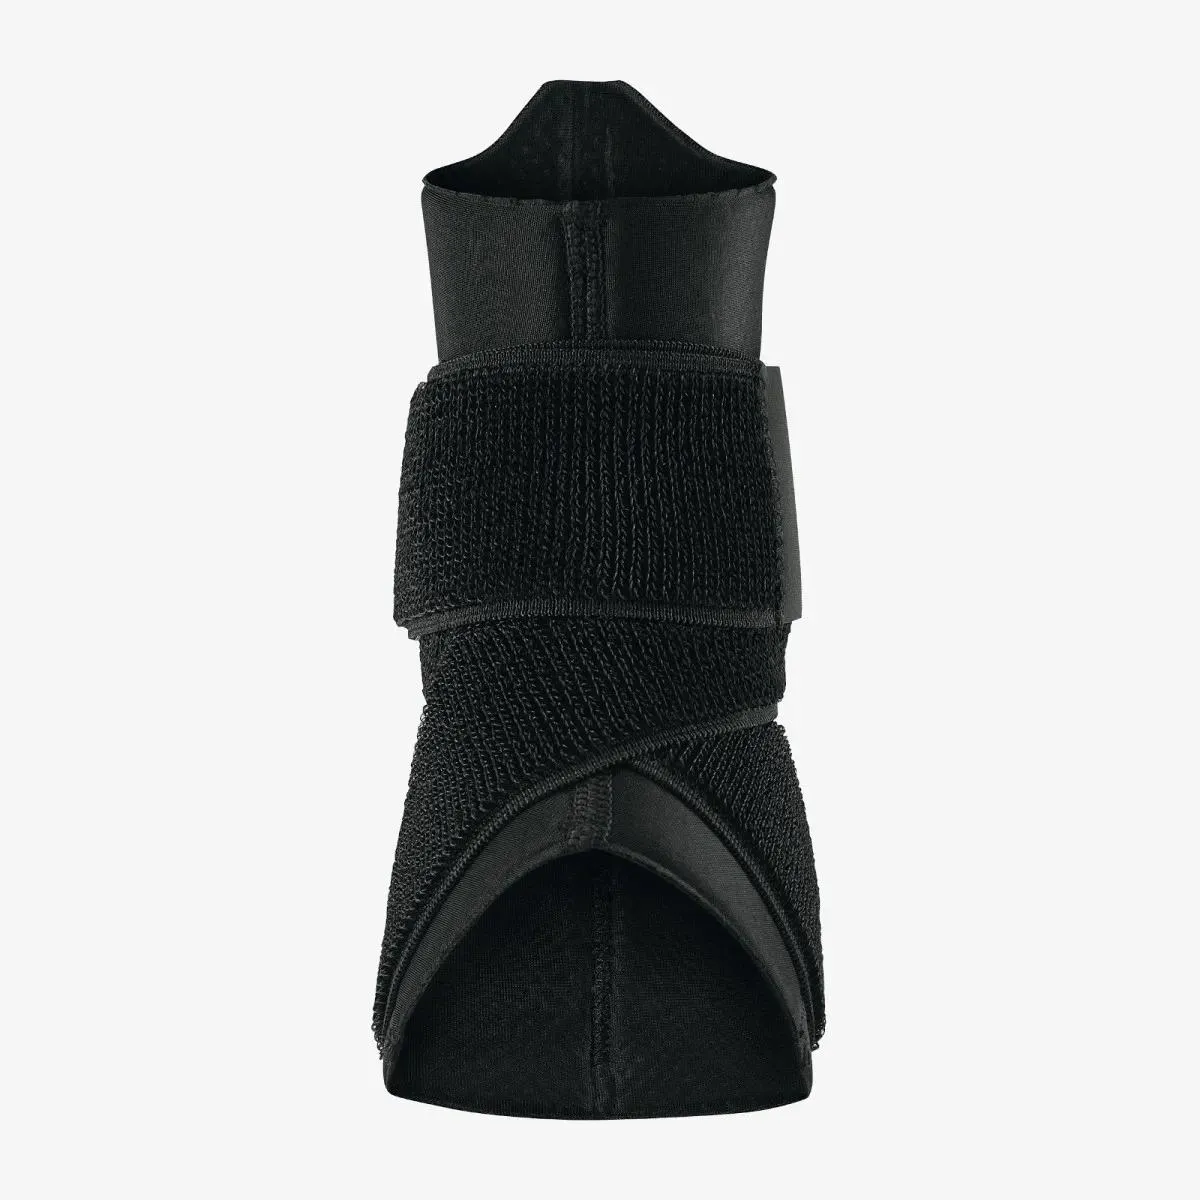 Nike Pro Ankle Sleeve with Strap 